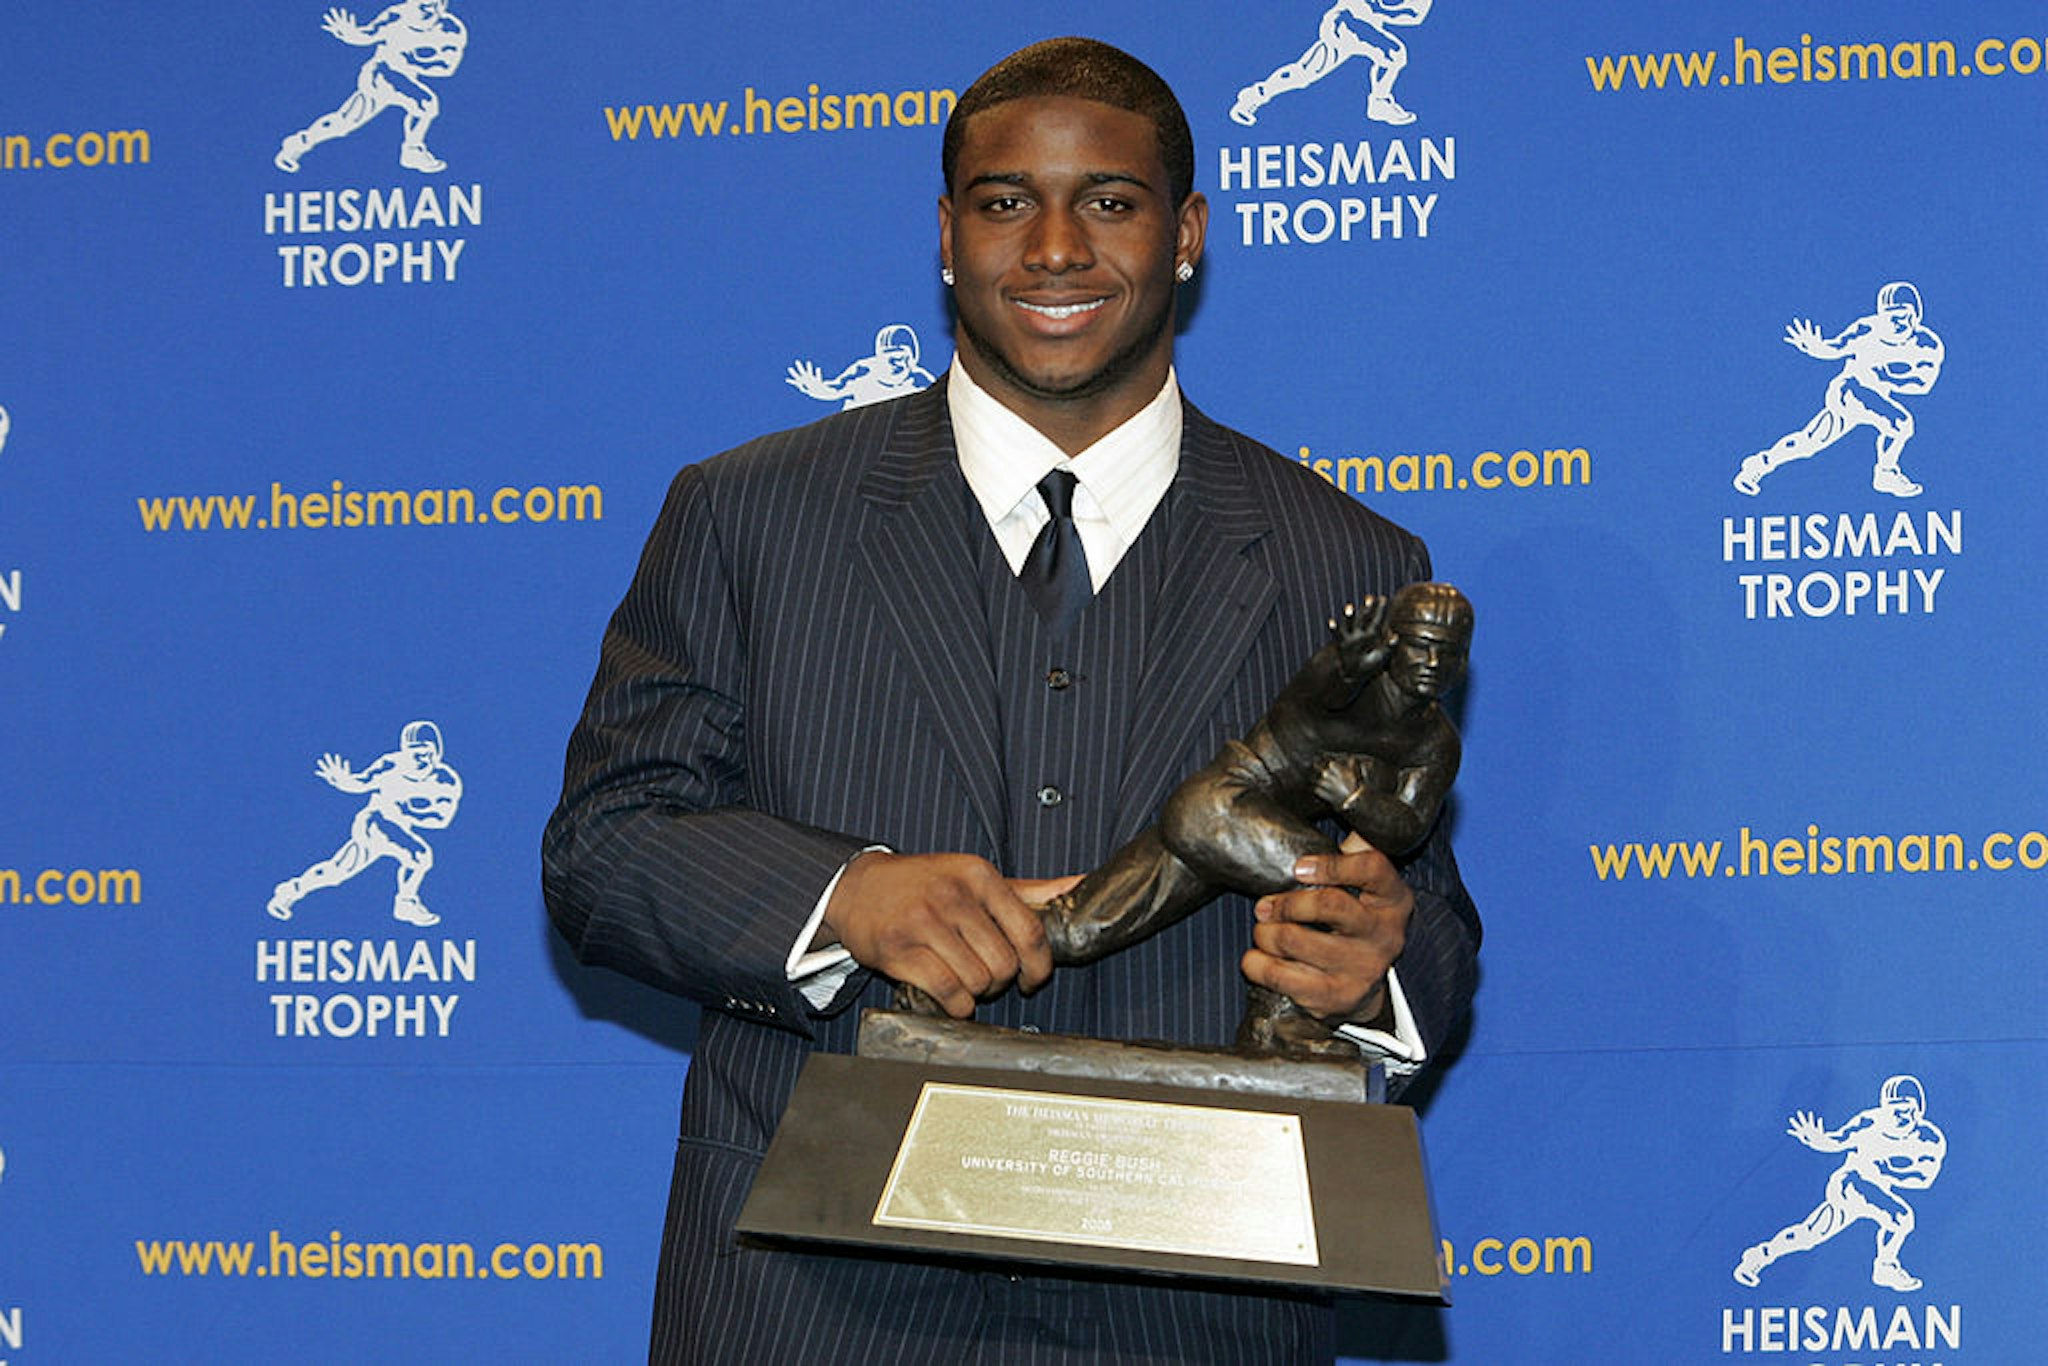 Reggie Bush, University of Southern California tailback holds the Heisman Trophy during the 2005 Heisman Trophy presentation at the Hard Rock Cafe in New York City, New York on December 10, 2005. Bush received 2,541 points in the ballot. (Photo by Michael Cohen/WireImage)